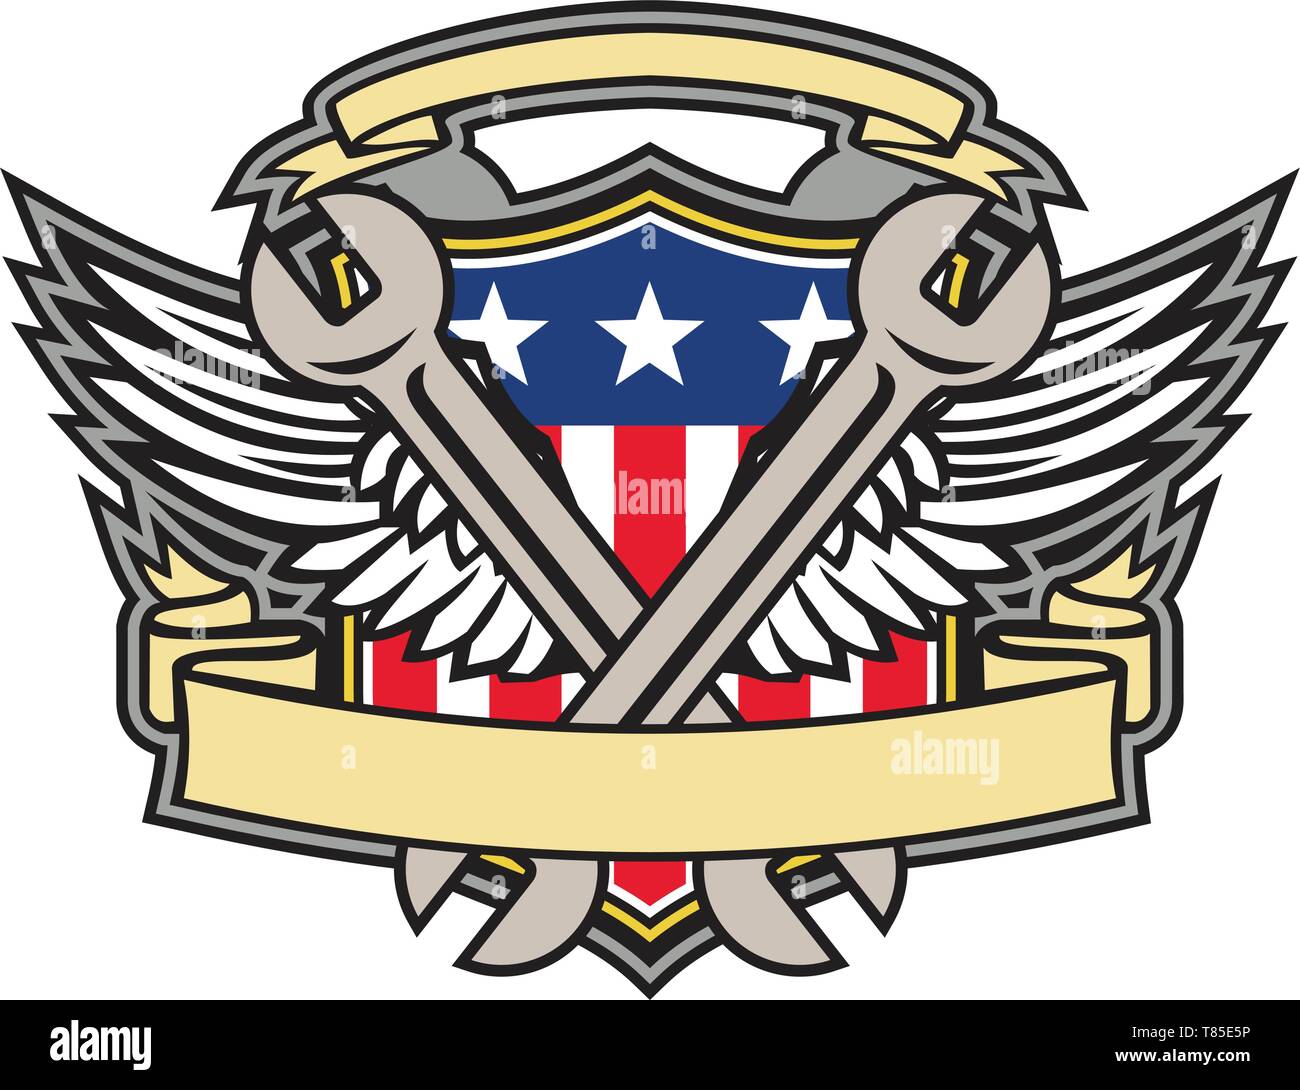 Premium Vector  Air force logo with wings, shields and stars